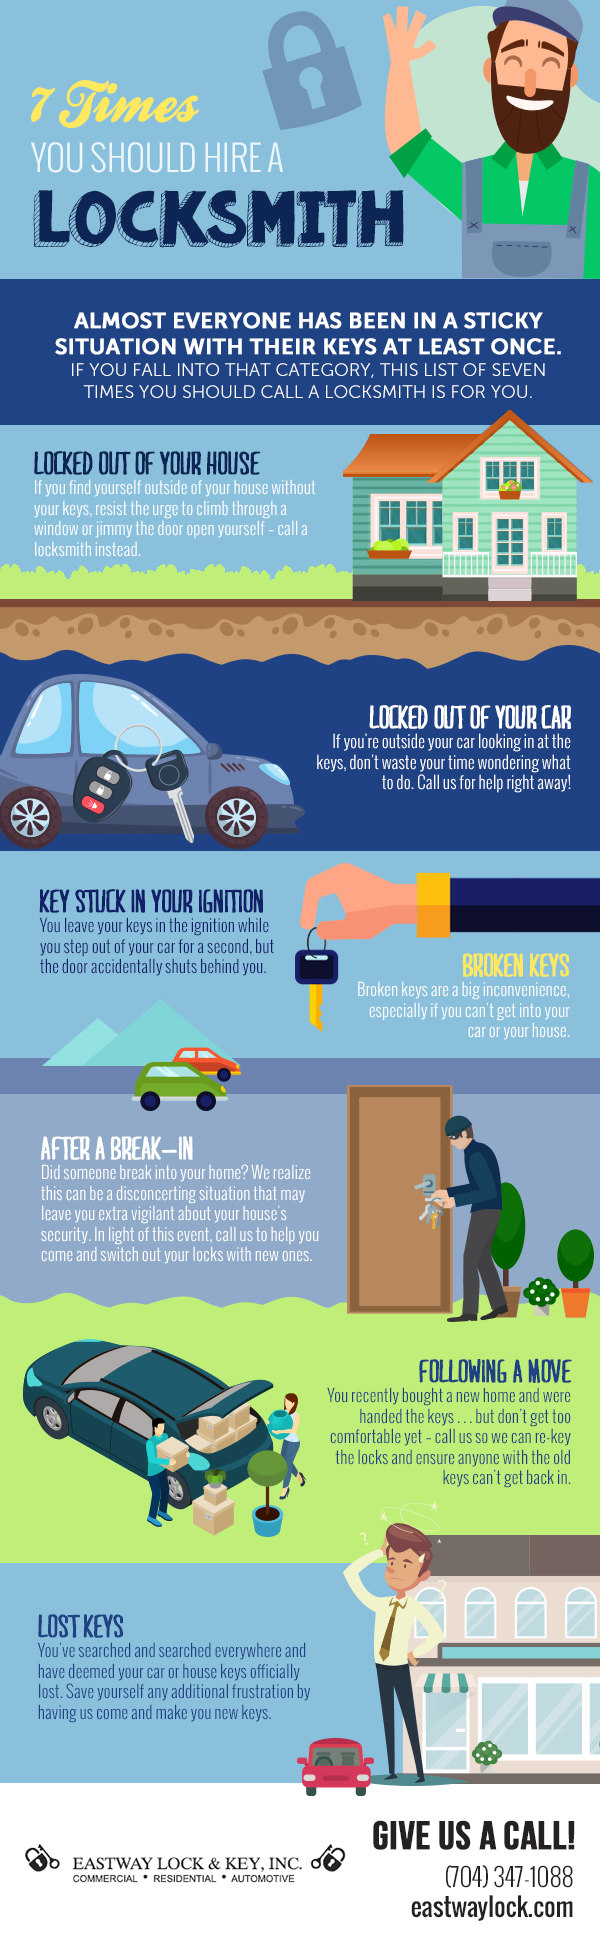 7 times you should hire a locksmith